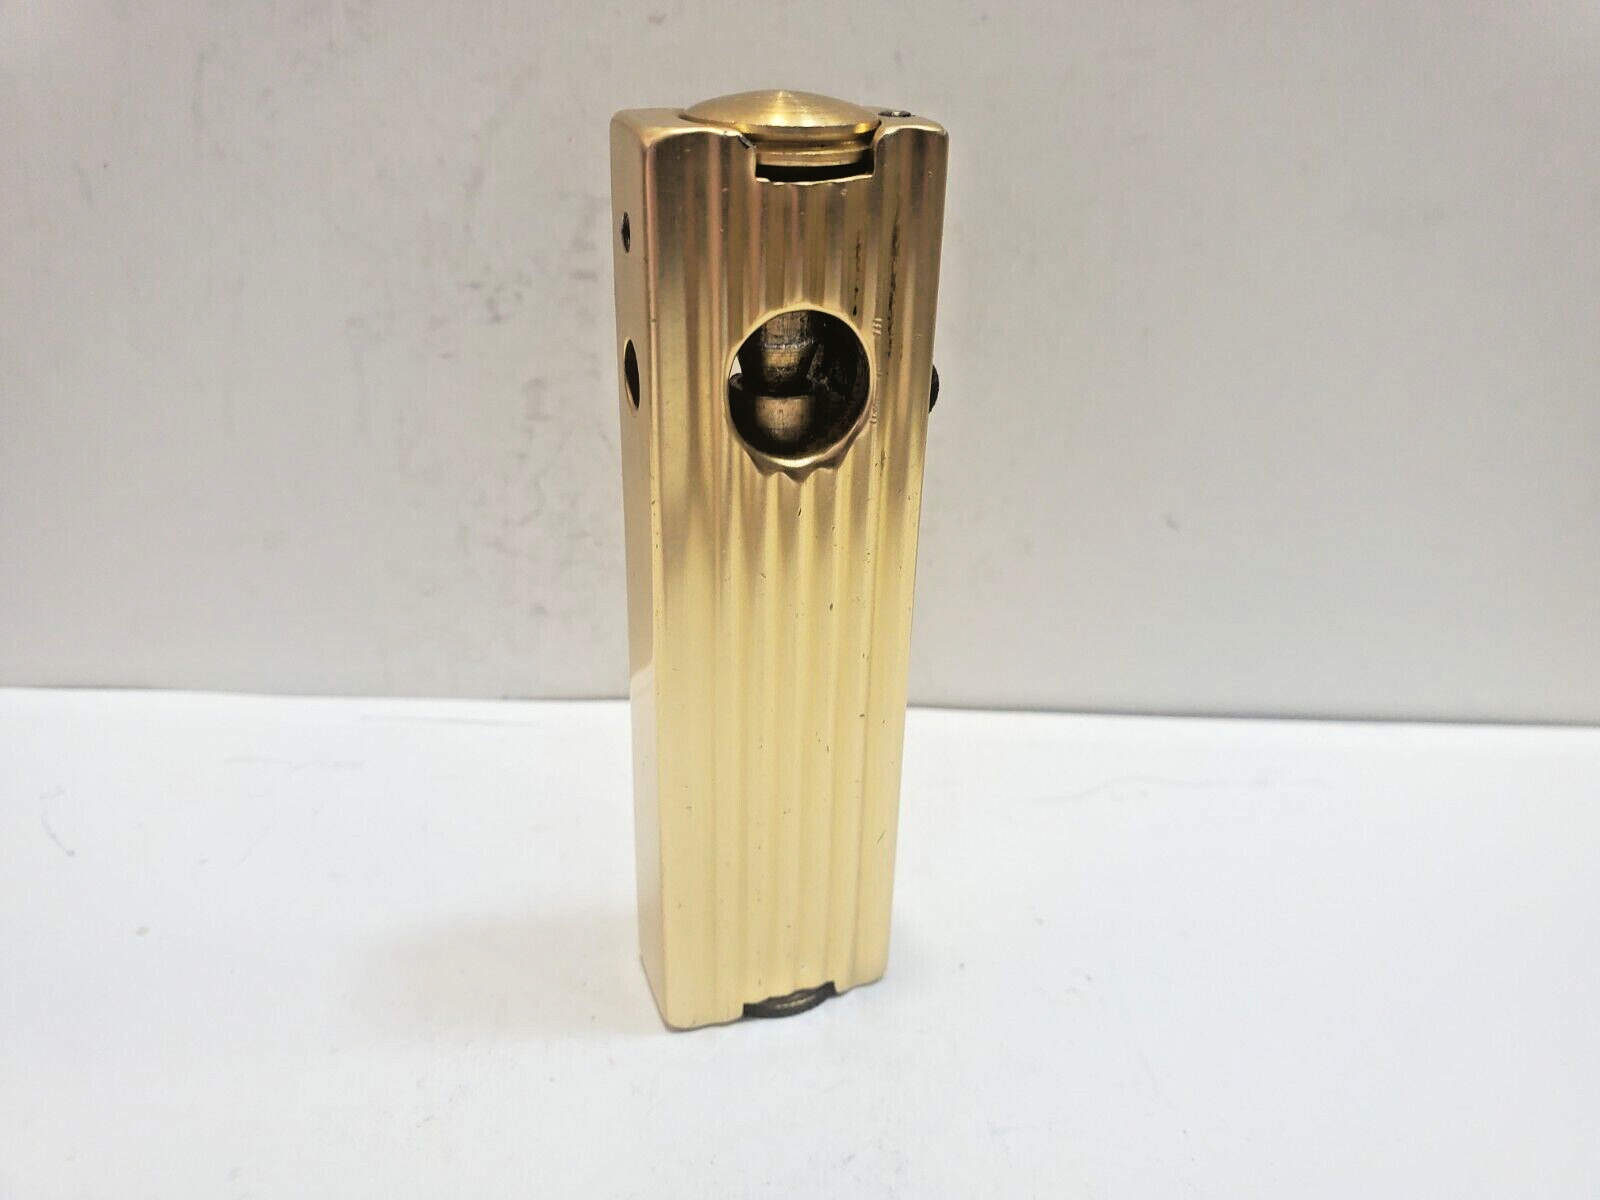 Vintage ROGERS Working Art Deco Aluminum Pipe Lighter, ENGLAND Gold Tone 6480/27